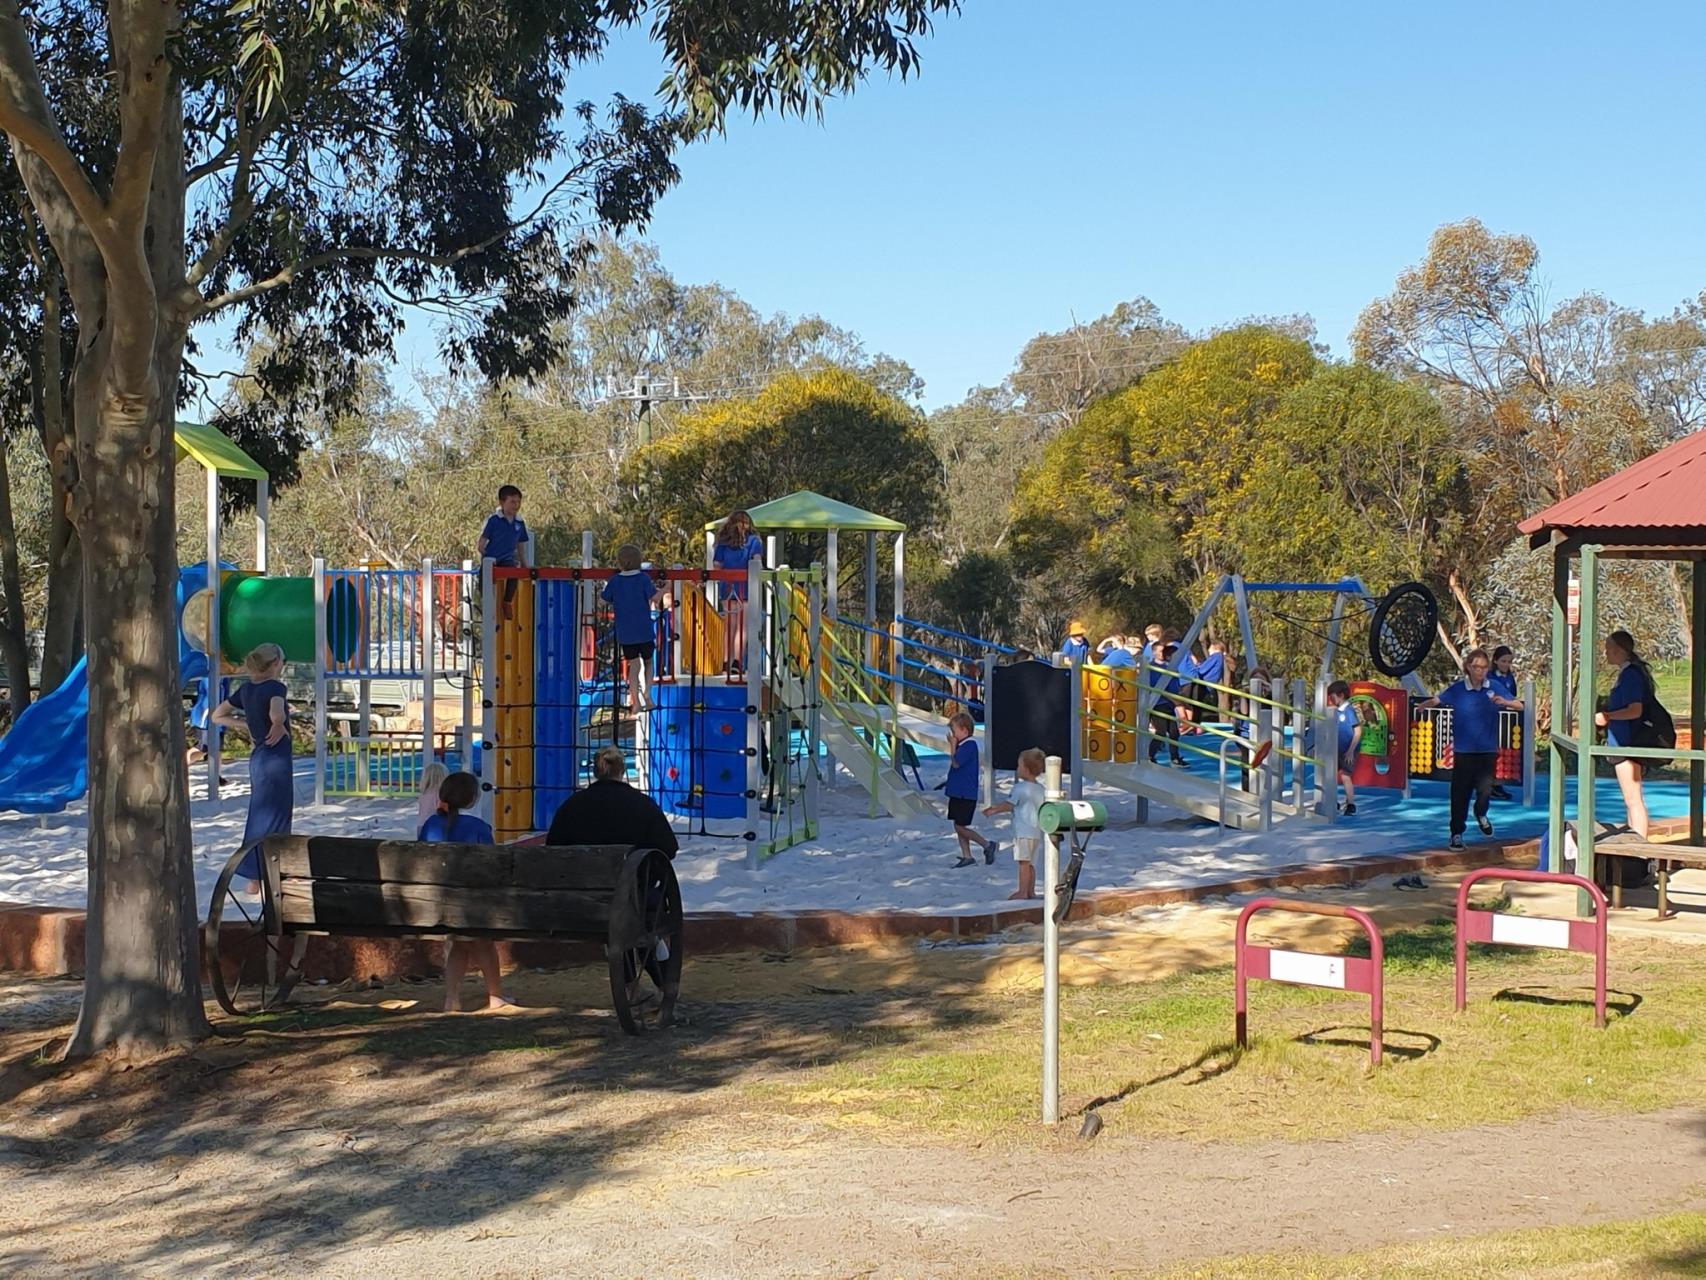 Notification – Temporary Restricted Access to Newcastle Park Playground